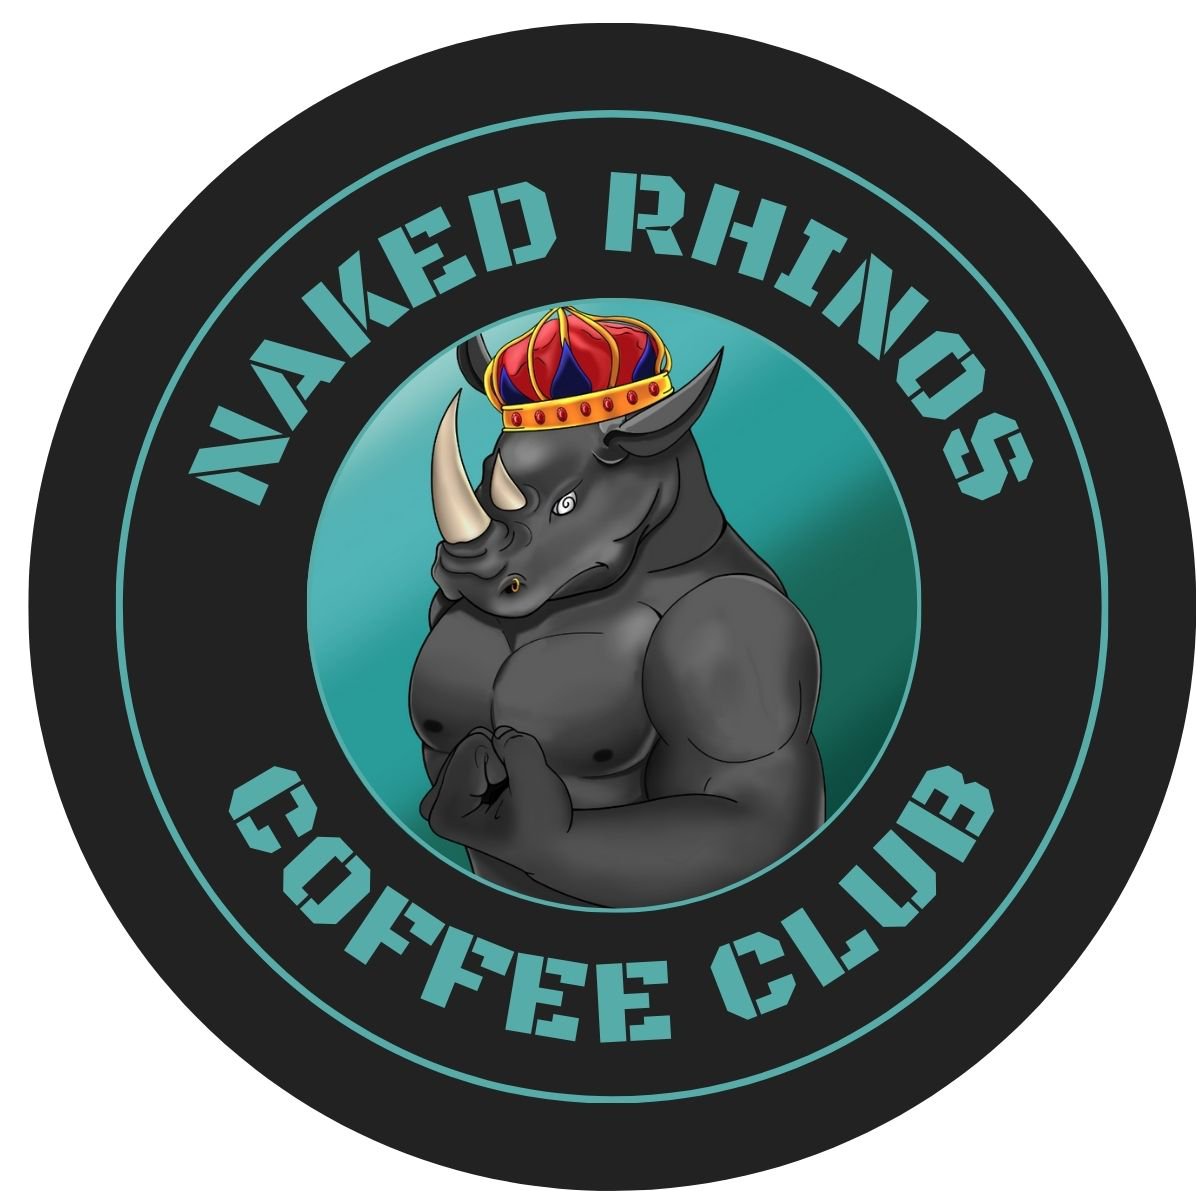 Not only are we giving back to Helpingrhinos.org, but we just went and did another thing. 

Wanna know what it is? Visit us at nakedrhinoscoffeeclub.com and scroll towards the bottom. 

Will you be our next member?

@SwirlOne
@Open24hrsNFT @LtcYeti @NYNFT93